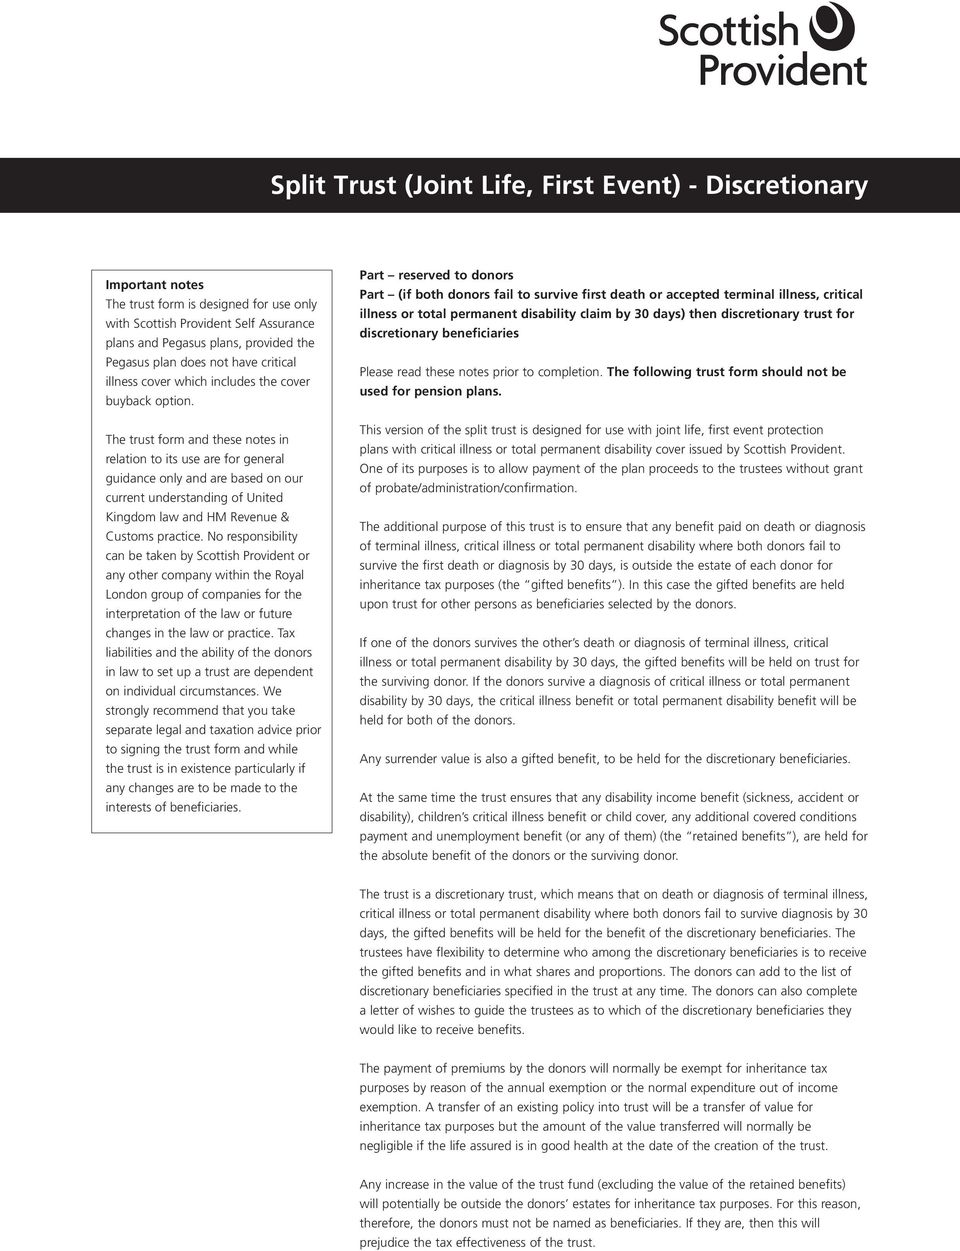 The trust form and these notes in relation to its use are for general guidance only and are based on our current understanding of United Kingdom law and HM Revenue & Customs practice.